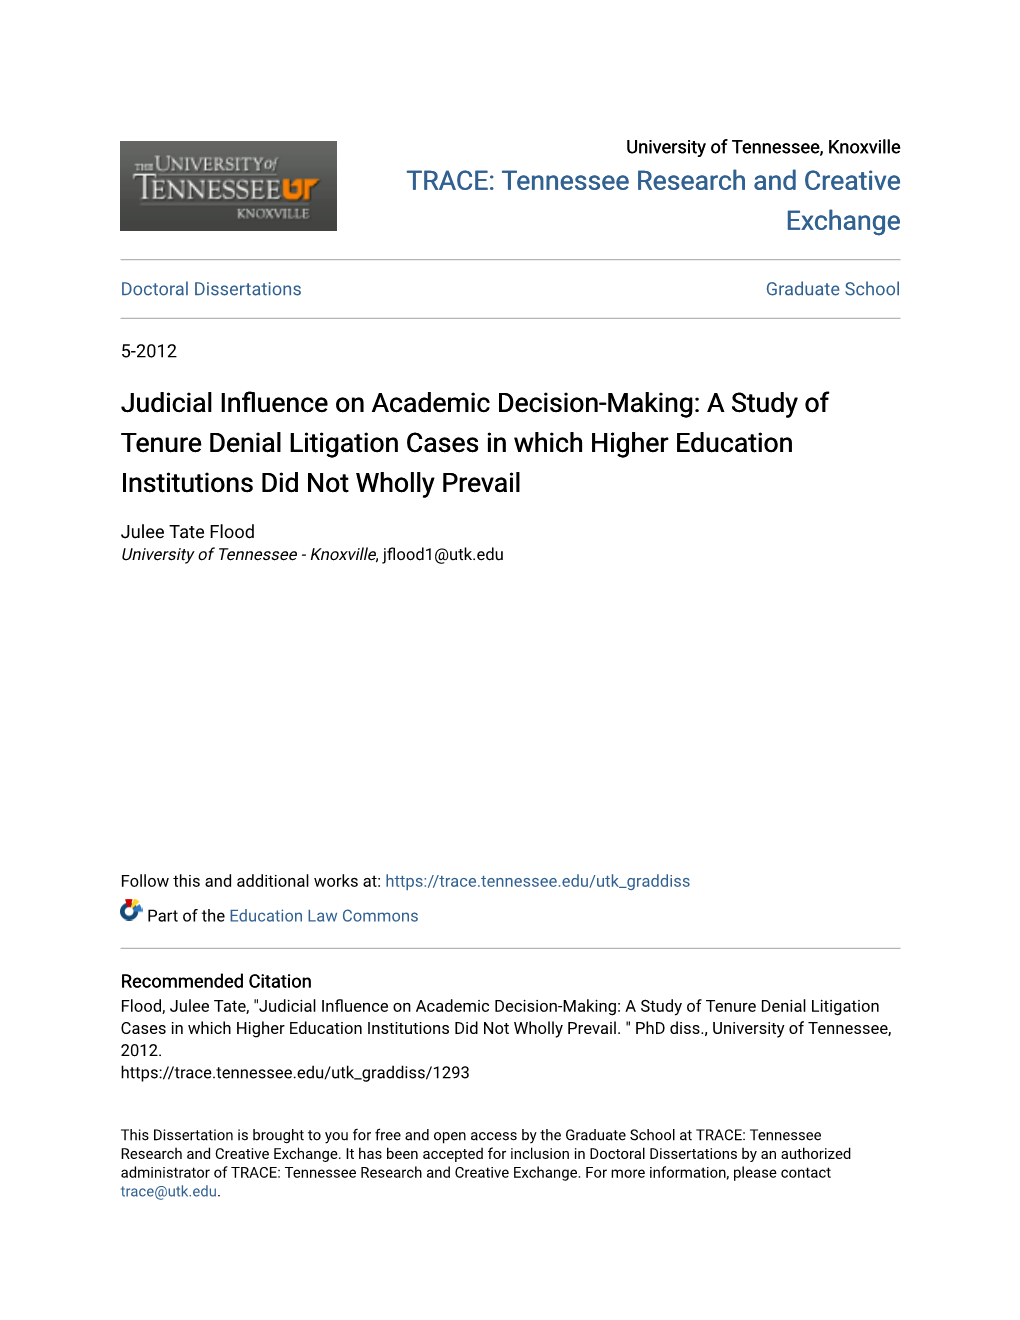 A Study of Tenure Denial Litigation Cases in Which Higher Education Institutions Did Not Wholly Prevail